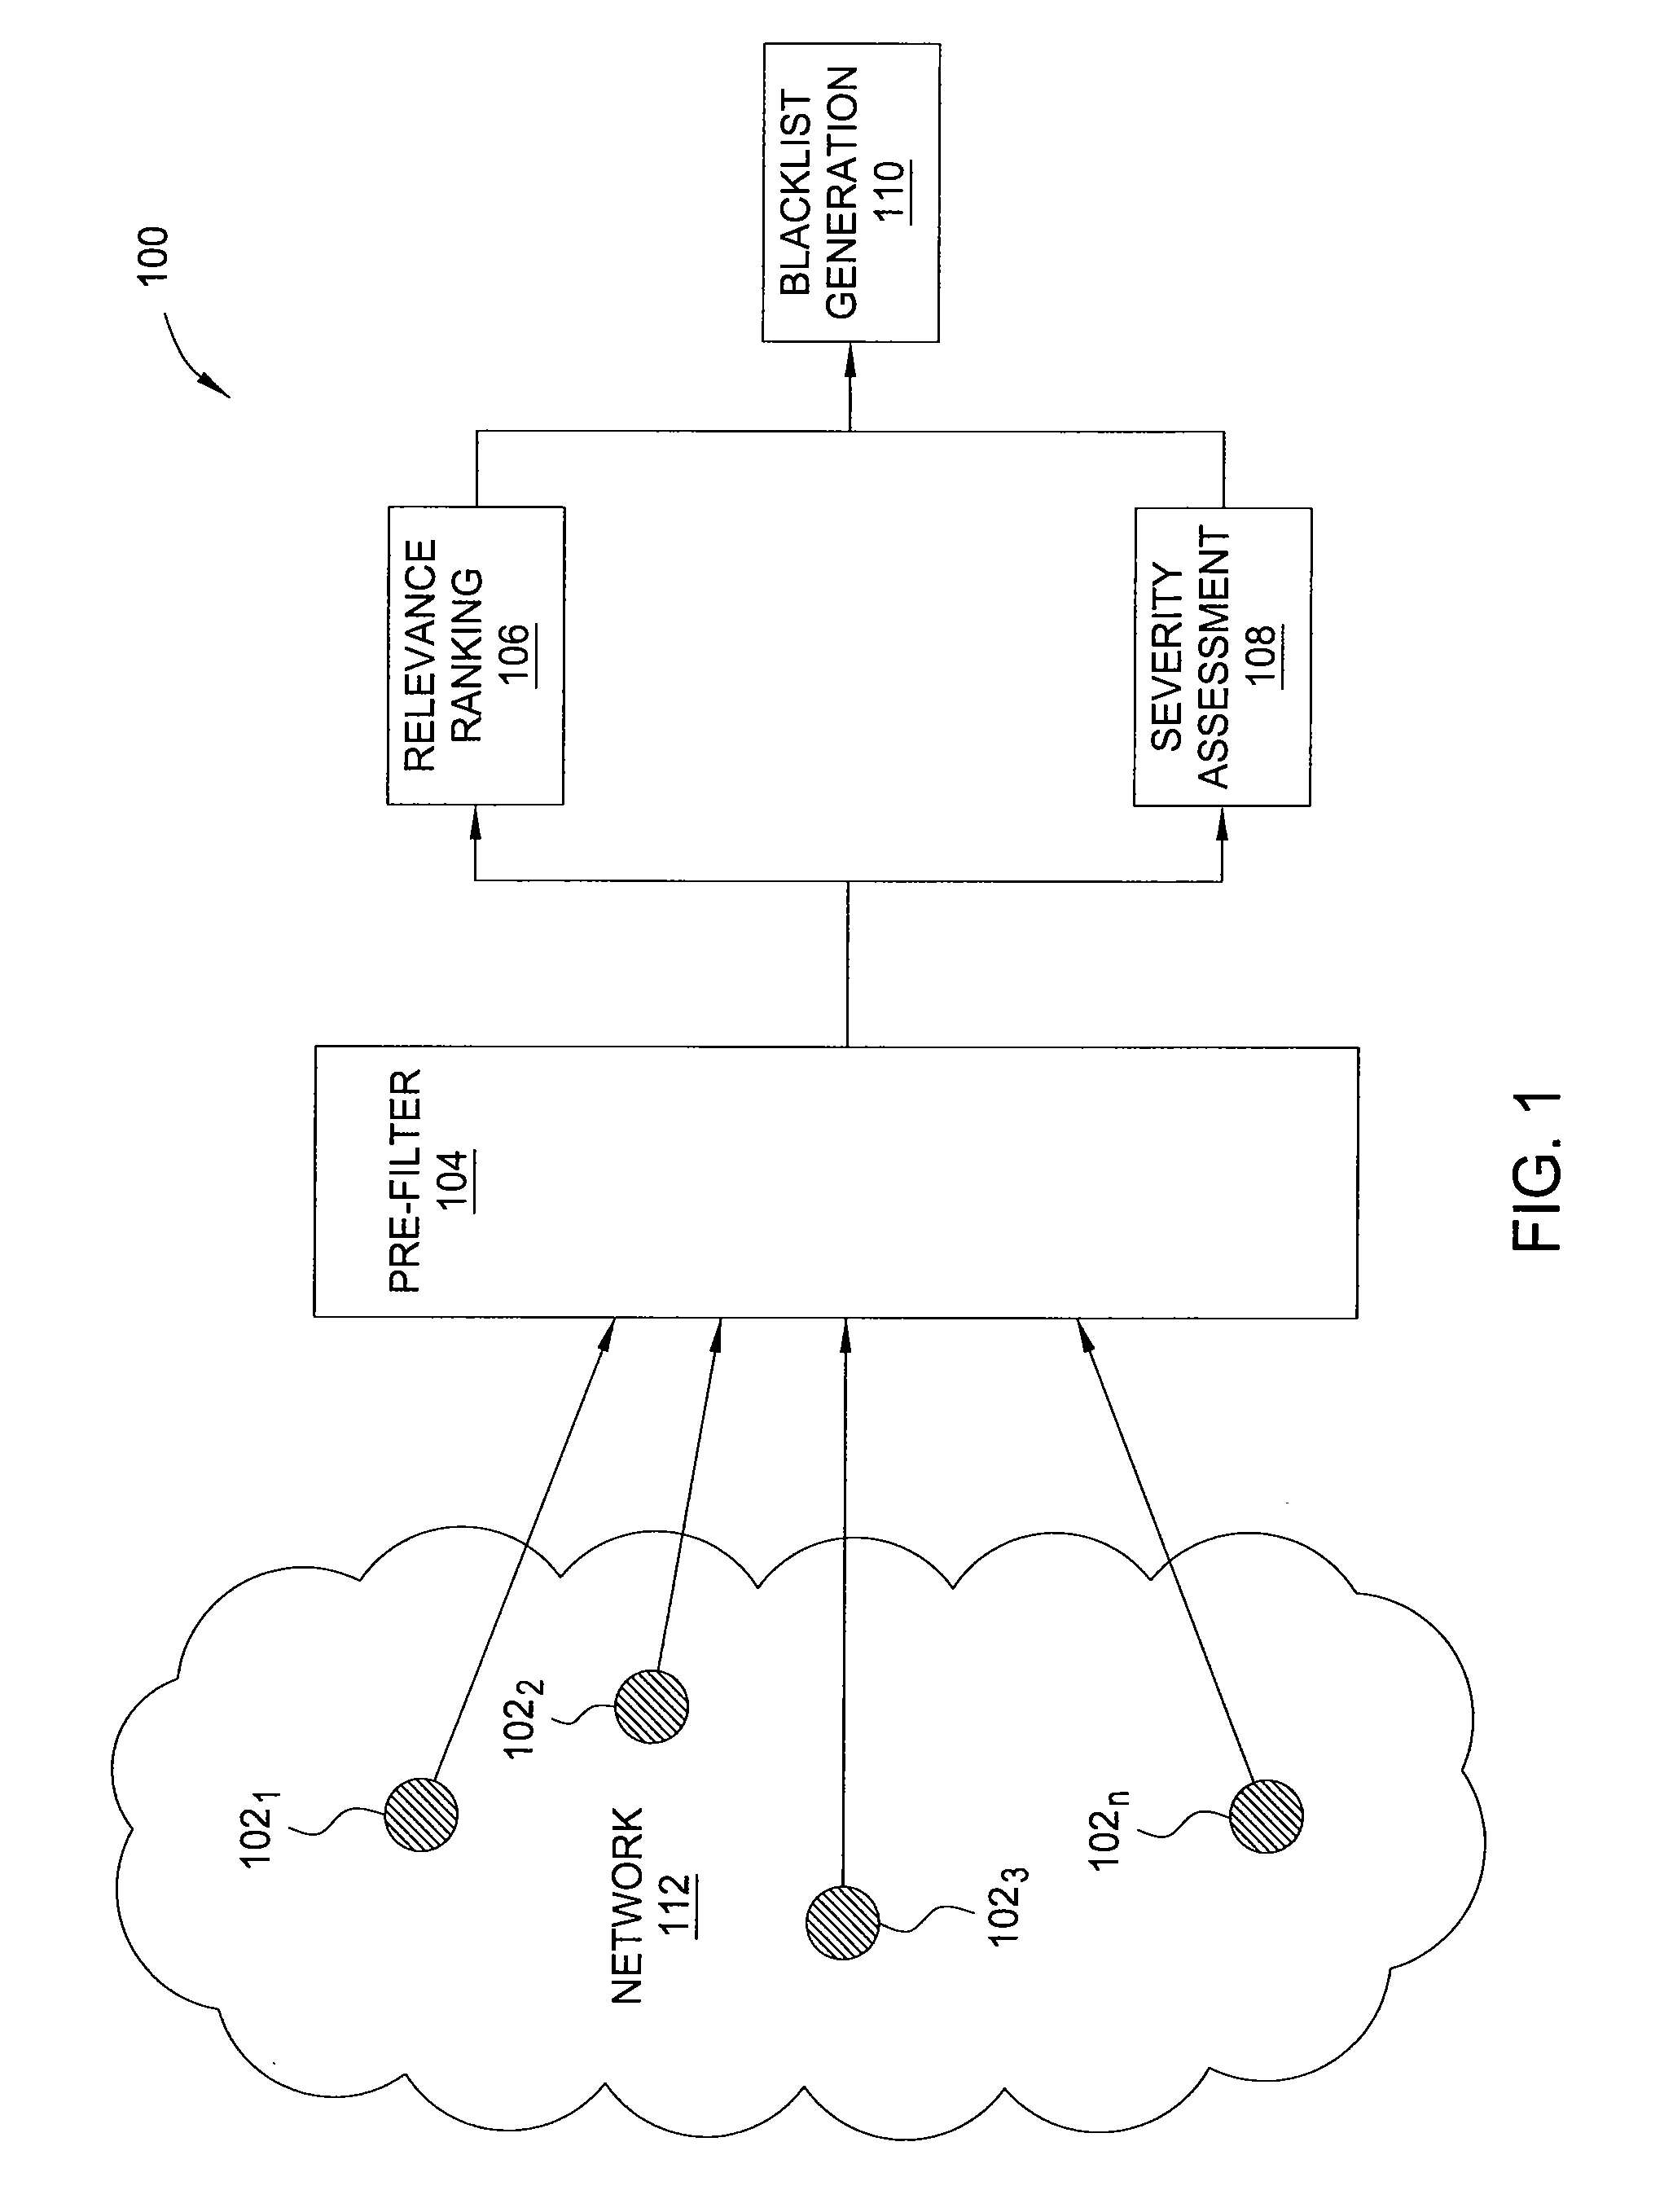 Method and apparatus for generating highly predictive blacklists